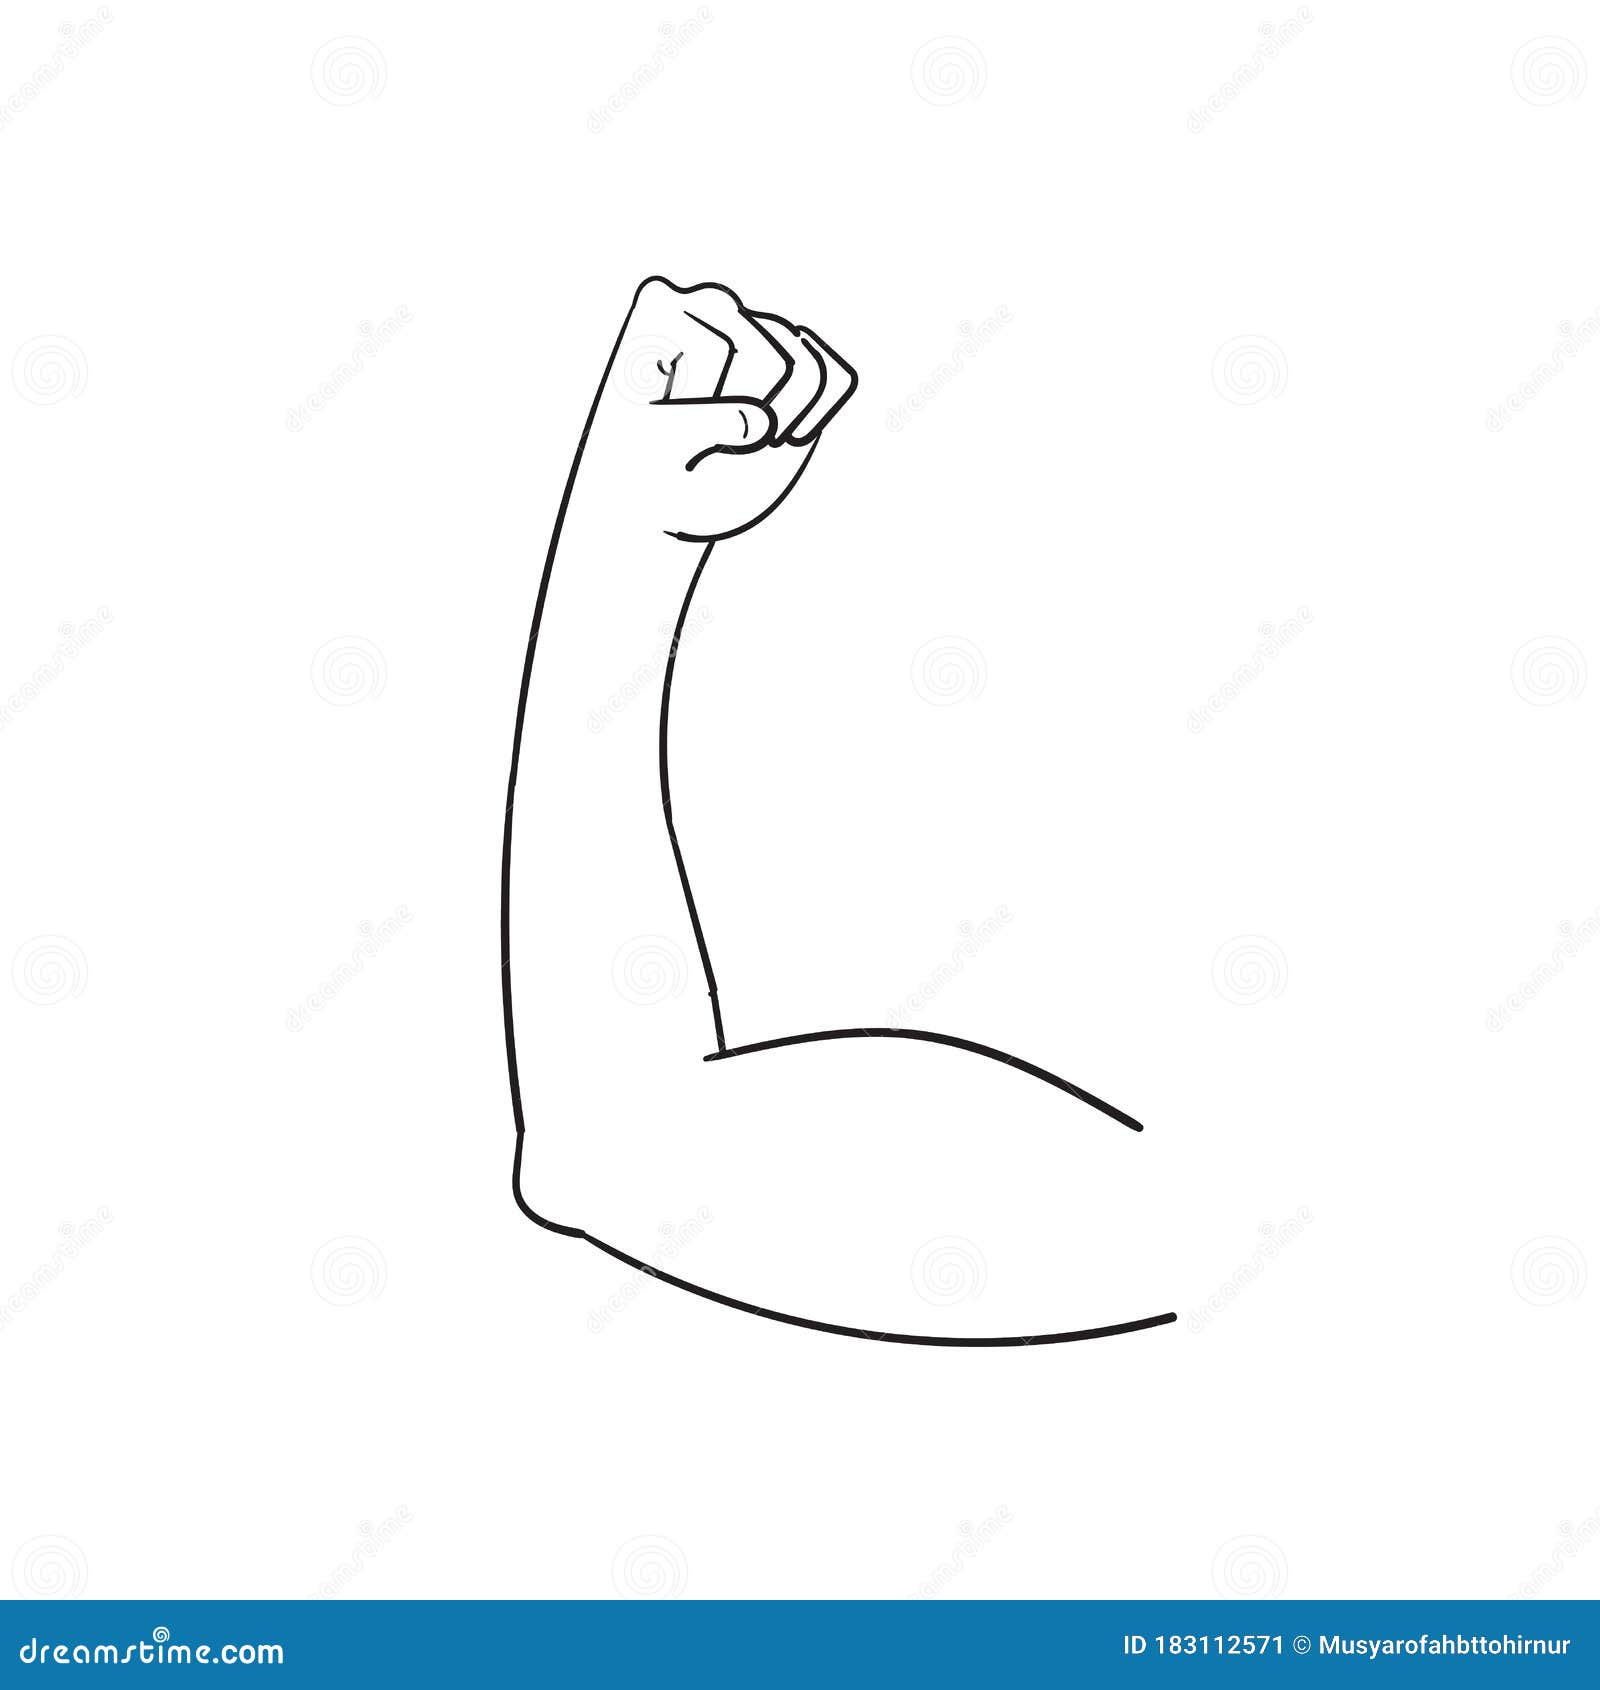 Muscle Emoticon Stock Illustrations 513 Muscle Emoticon Stock Illustrations Vectors Clipart Dreamstime